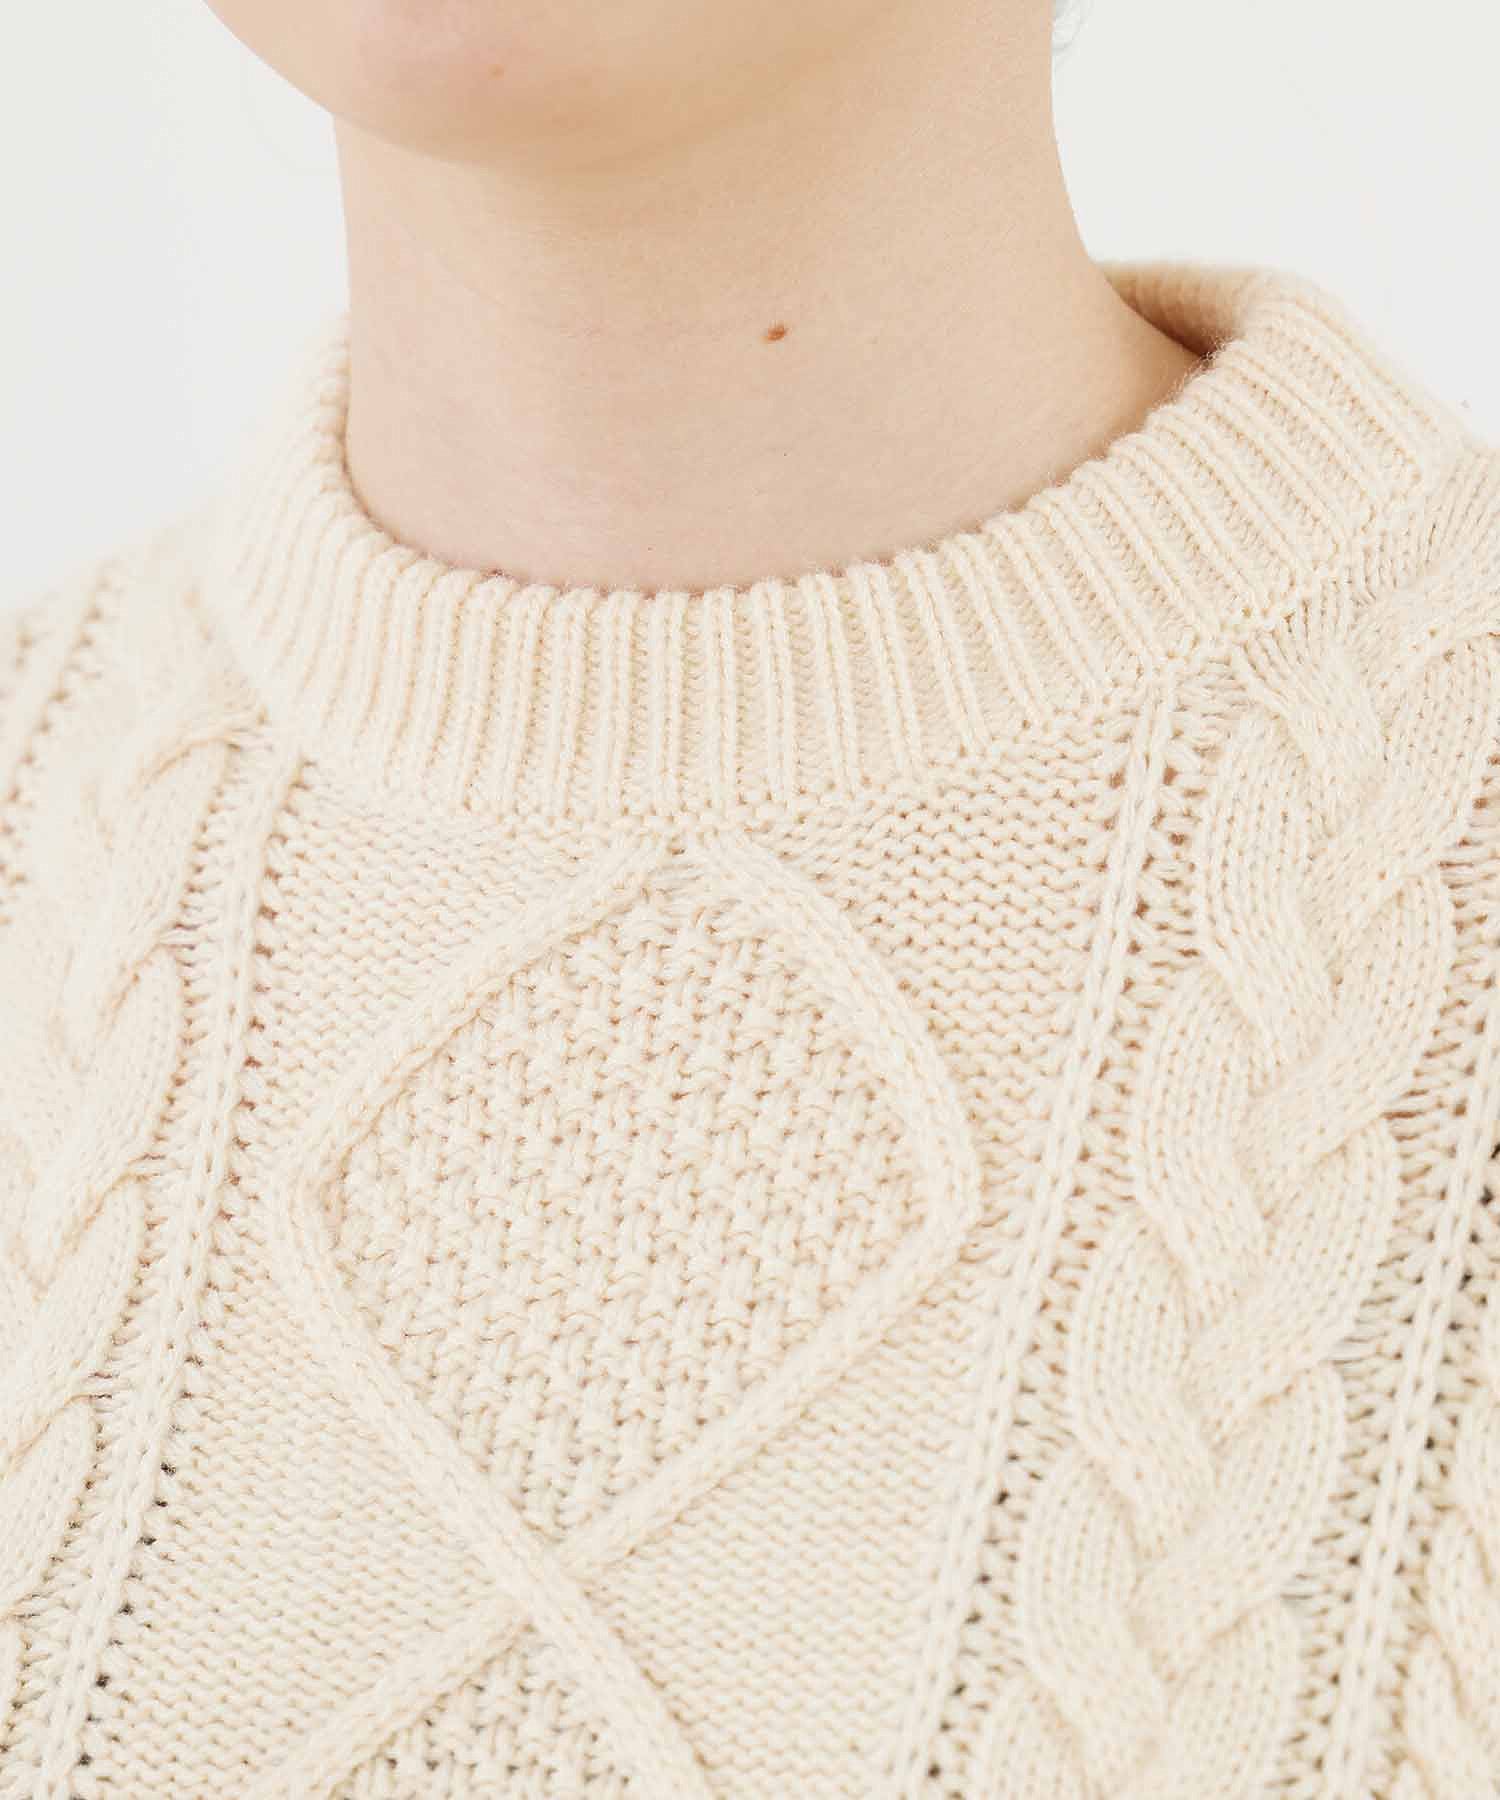 CABLE KNIT TOP MILKFED.